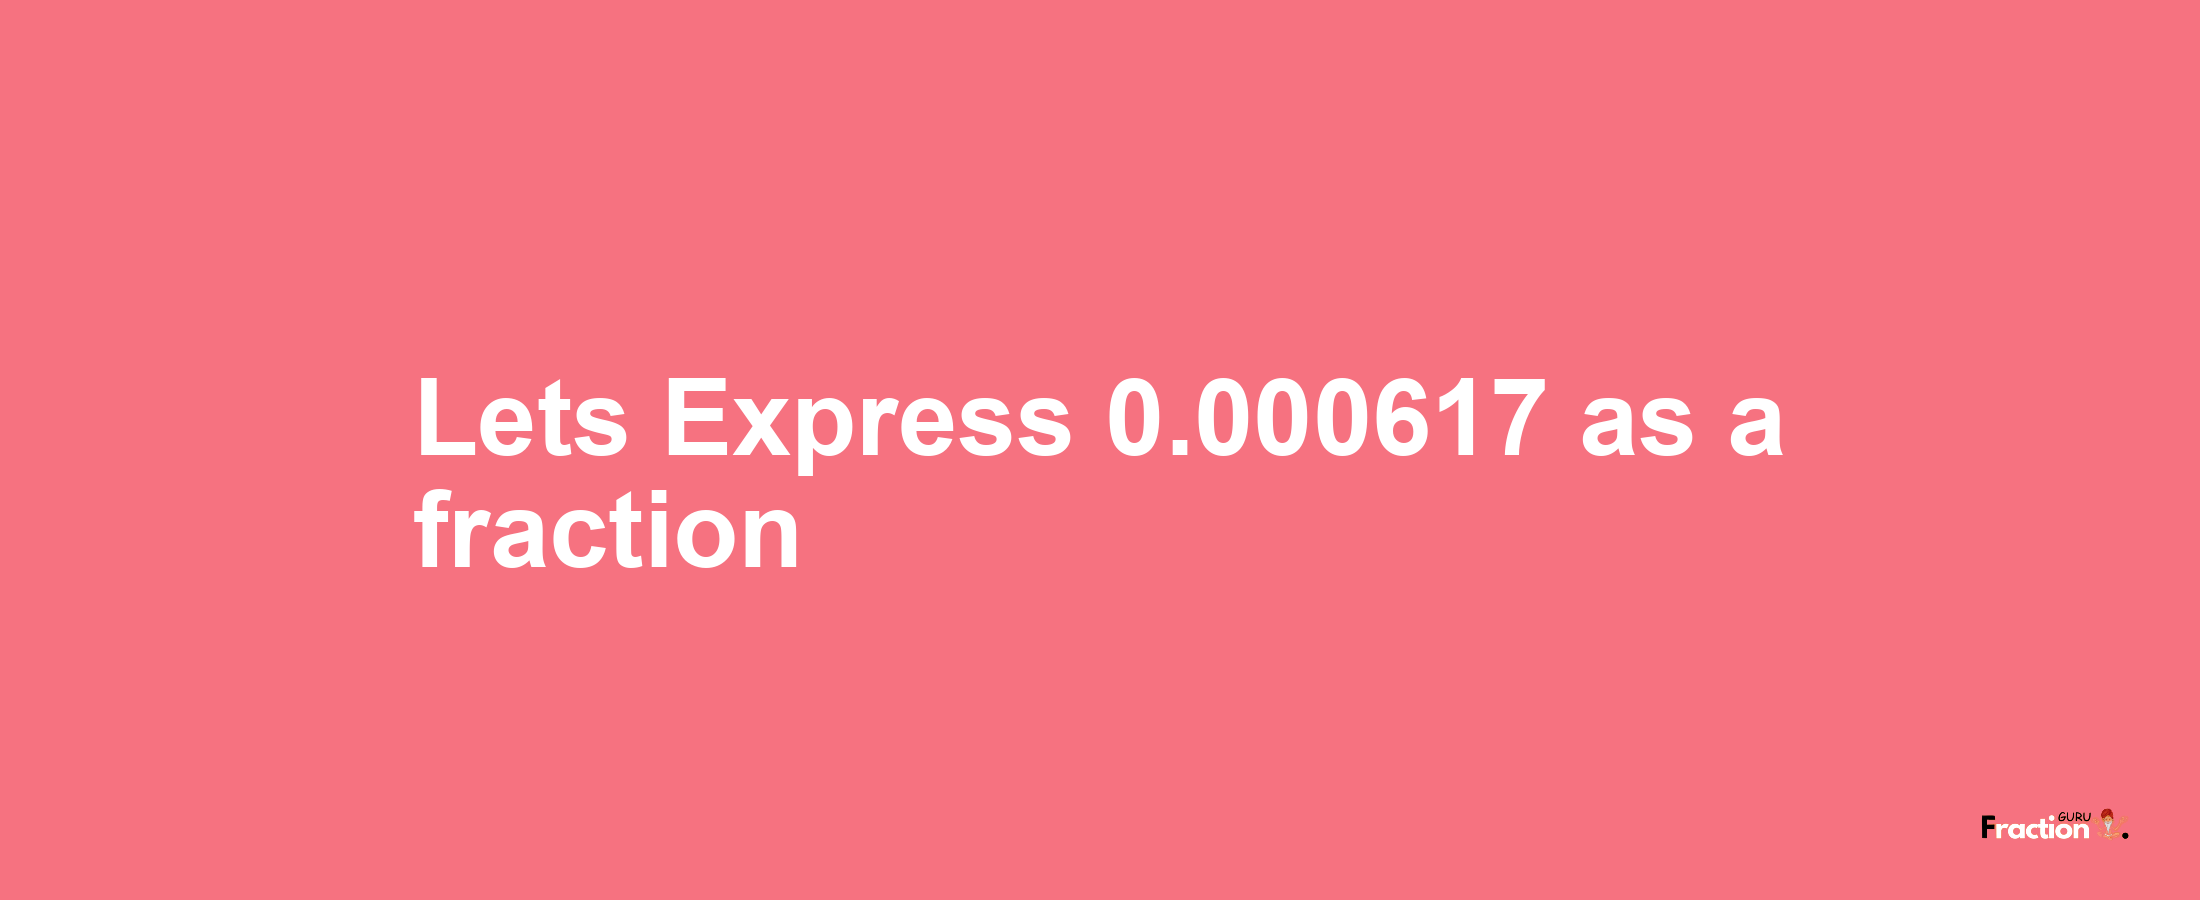 Lets Express 0.000617 as afraction